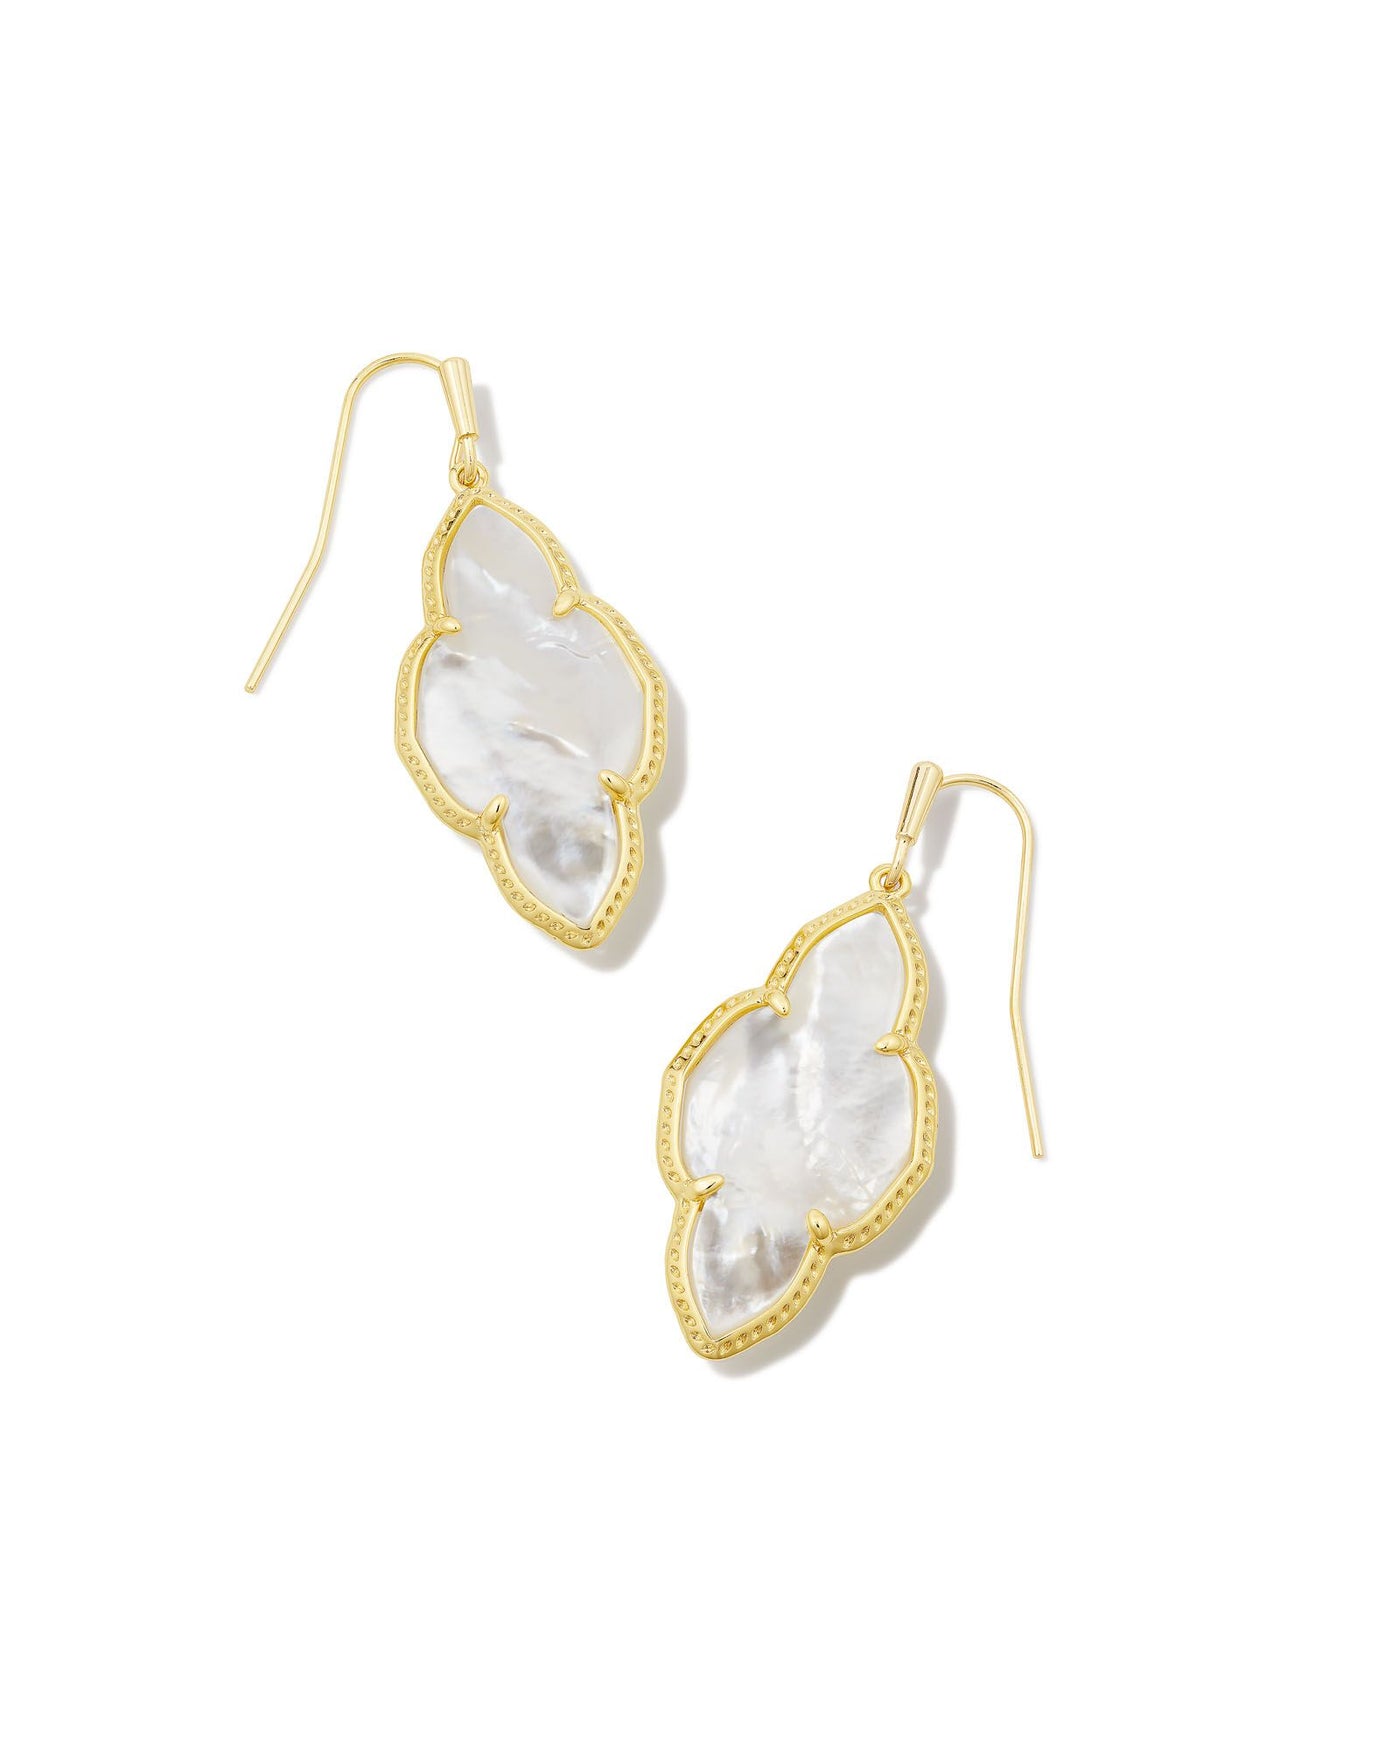 Kendra Scott Abbie Drop Earrings Gold Ivory Mother-Of-Pearl-Earrings-Kendra Scott-Market Street Nest, Fashionable Clothing, Shoes and Home Décor Located in Mabank, TX